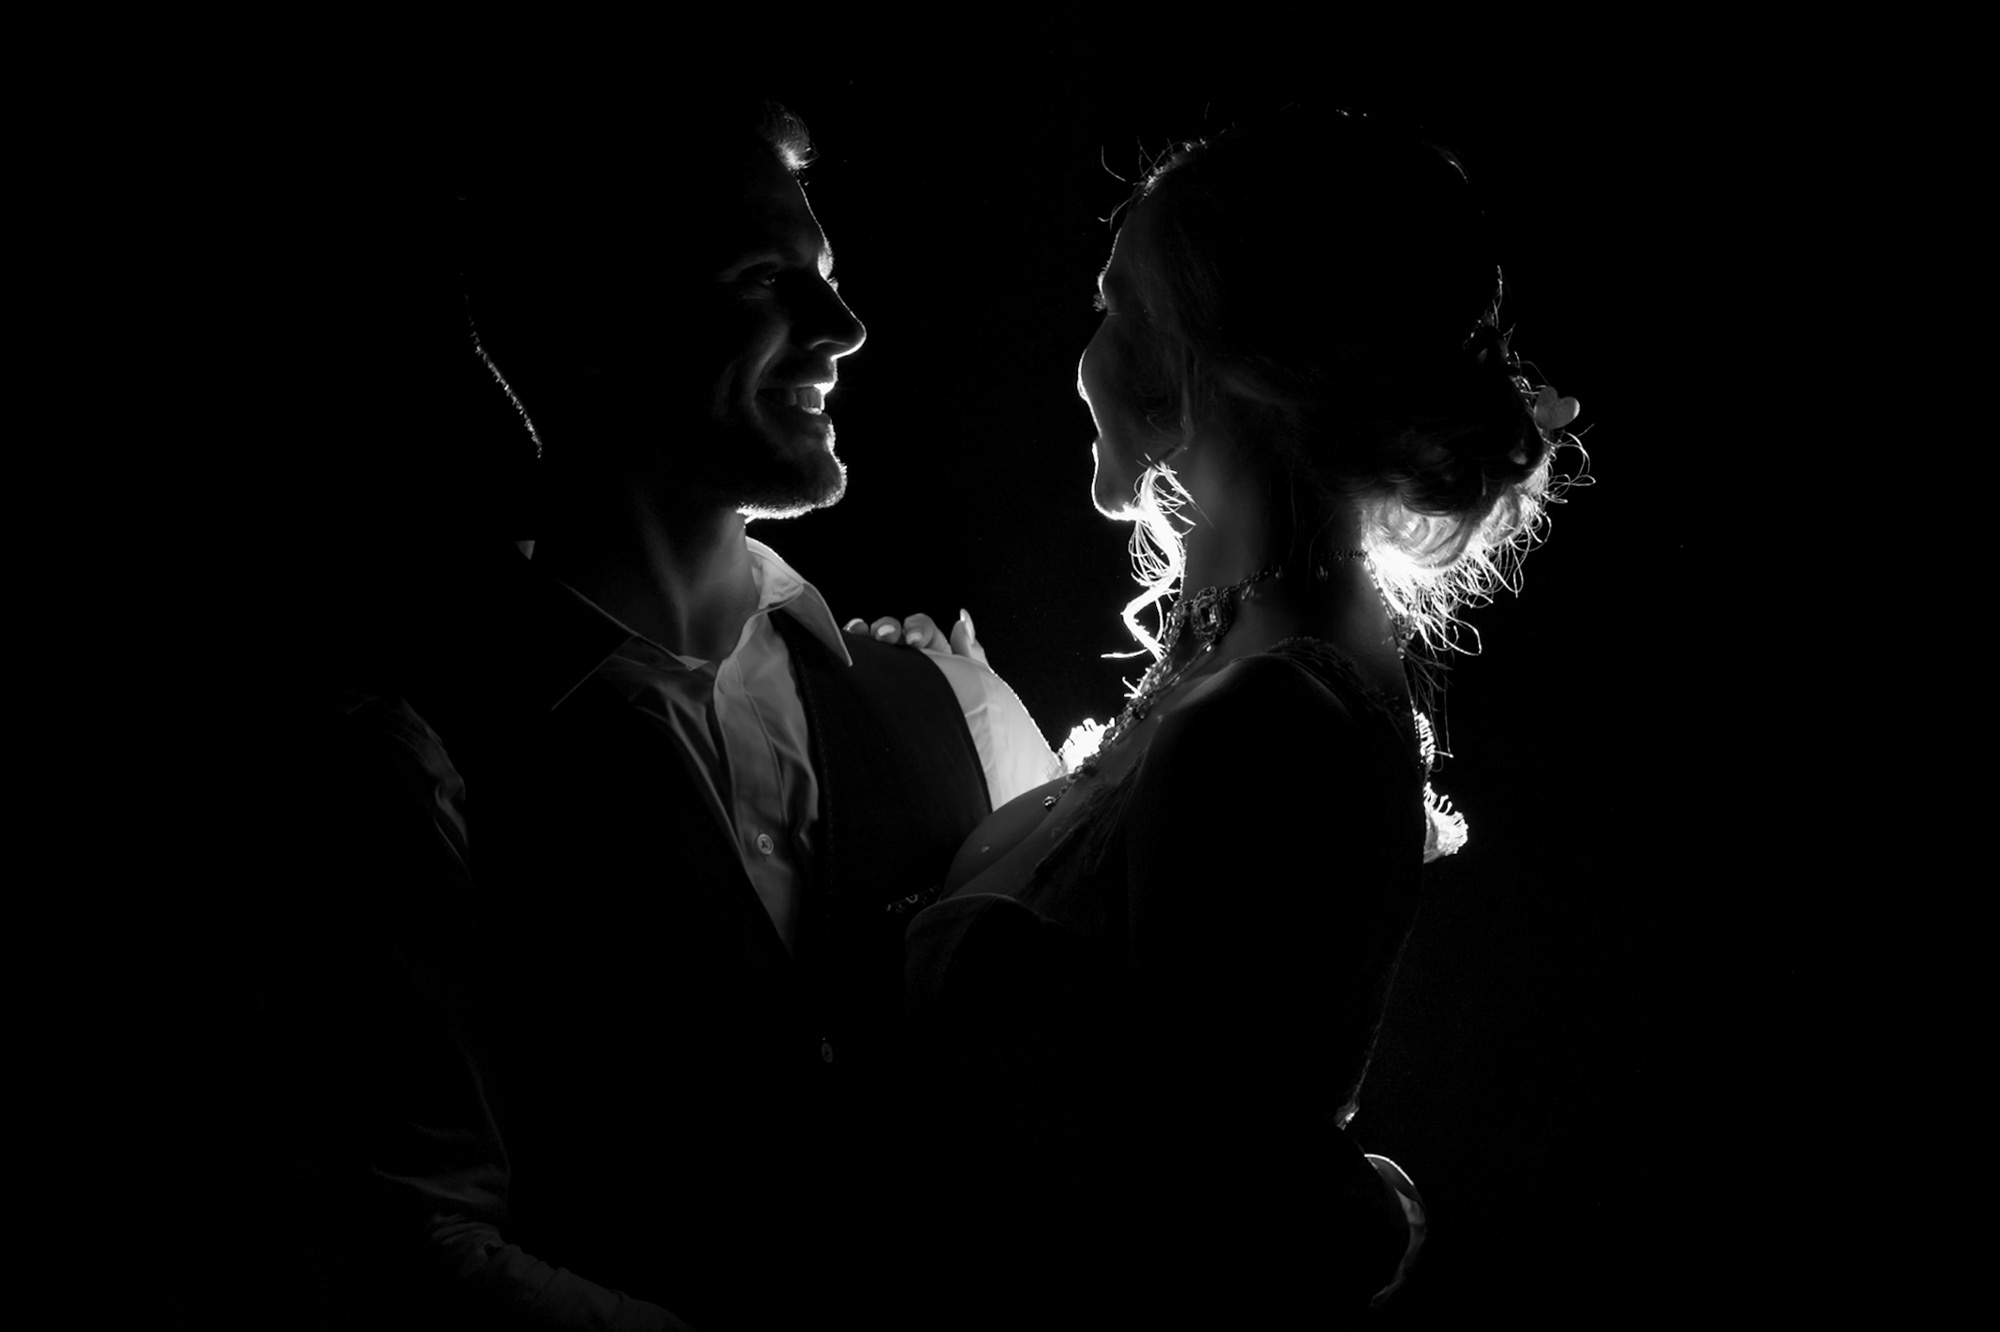 Newly married couple backlit with romantic lighting